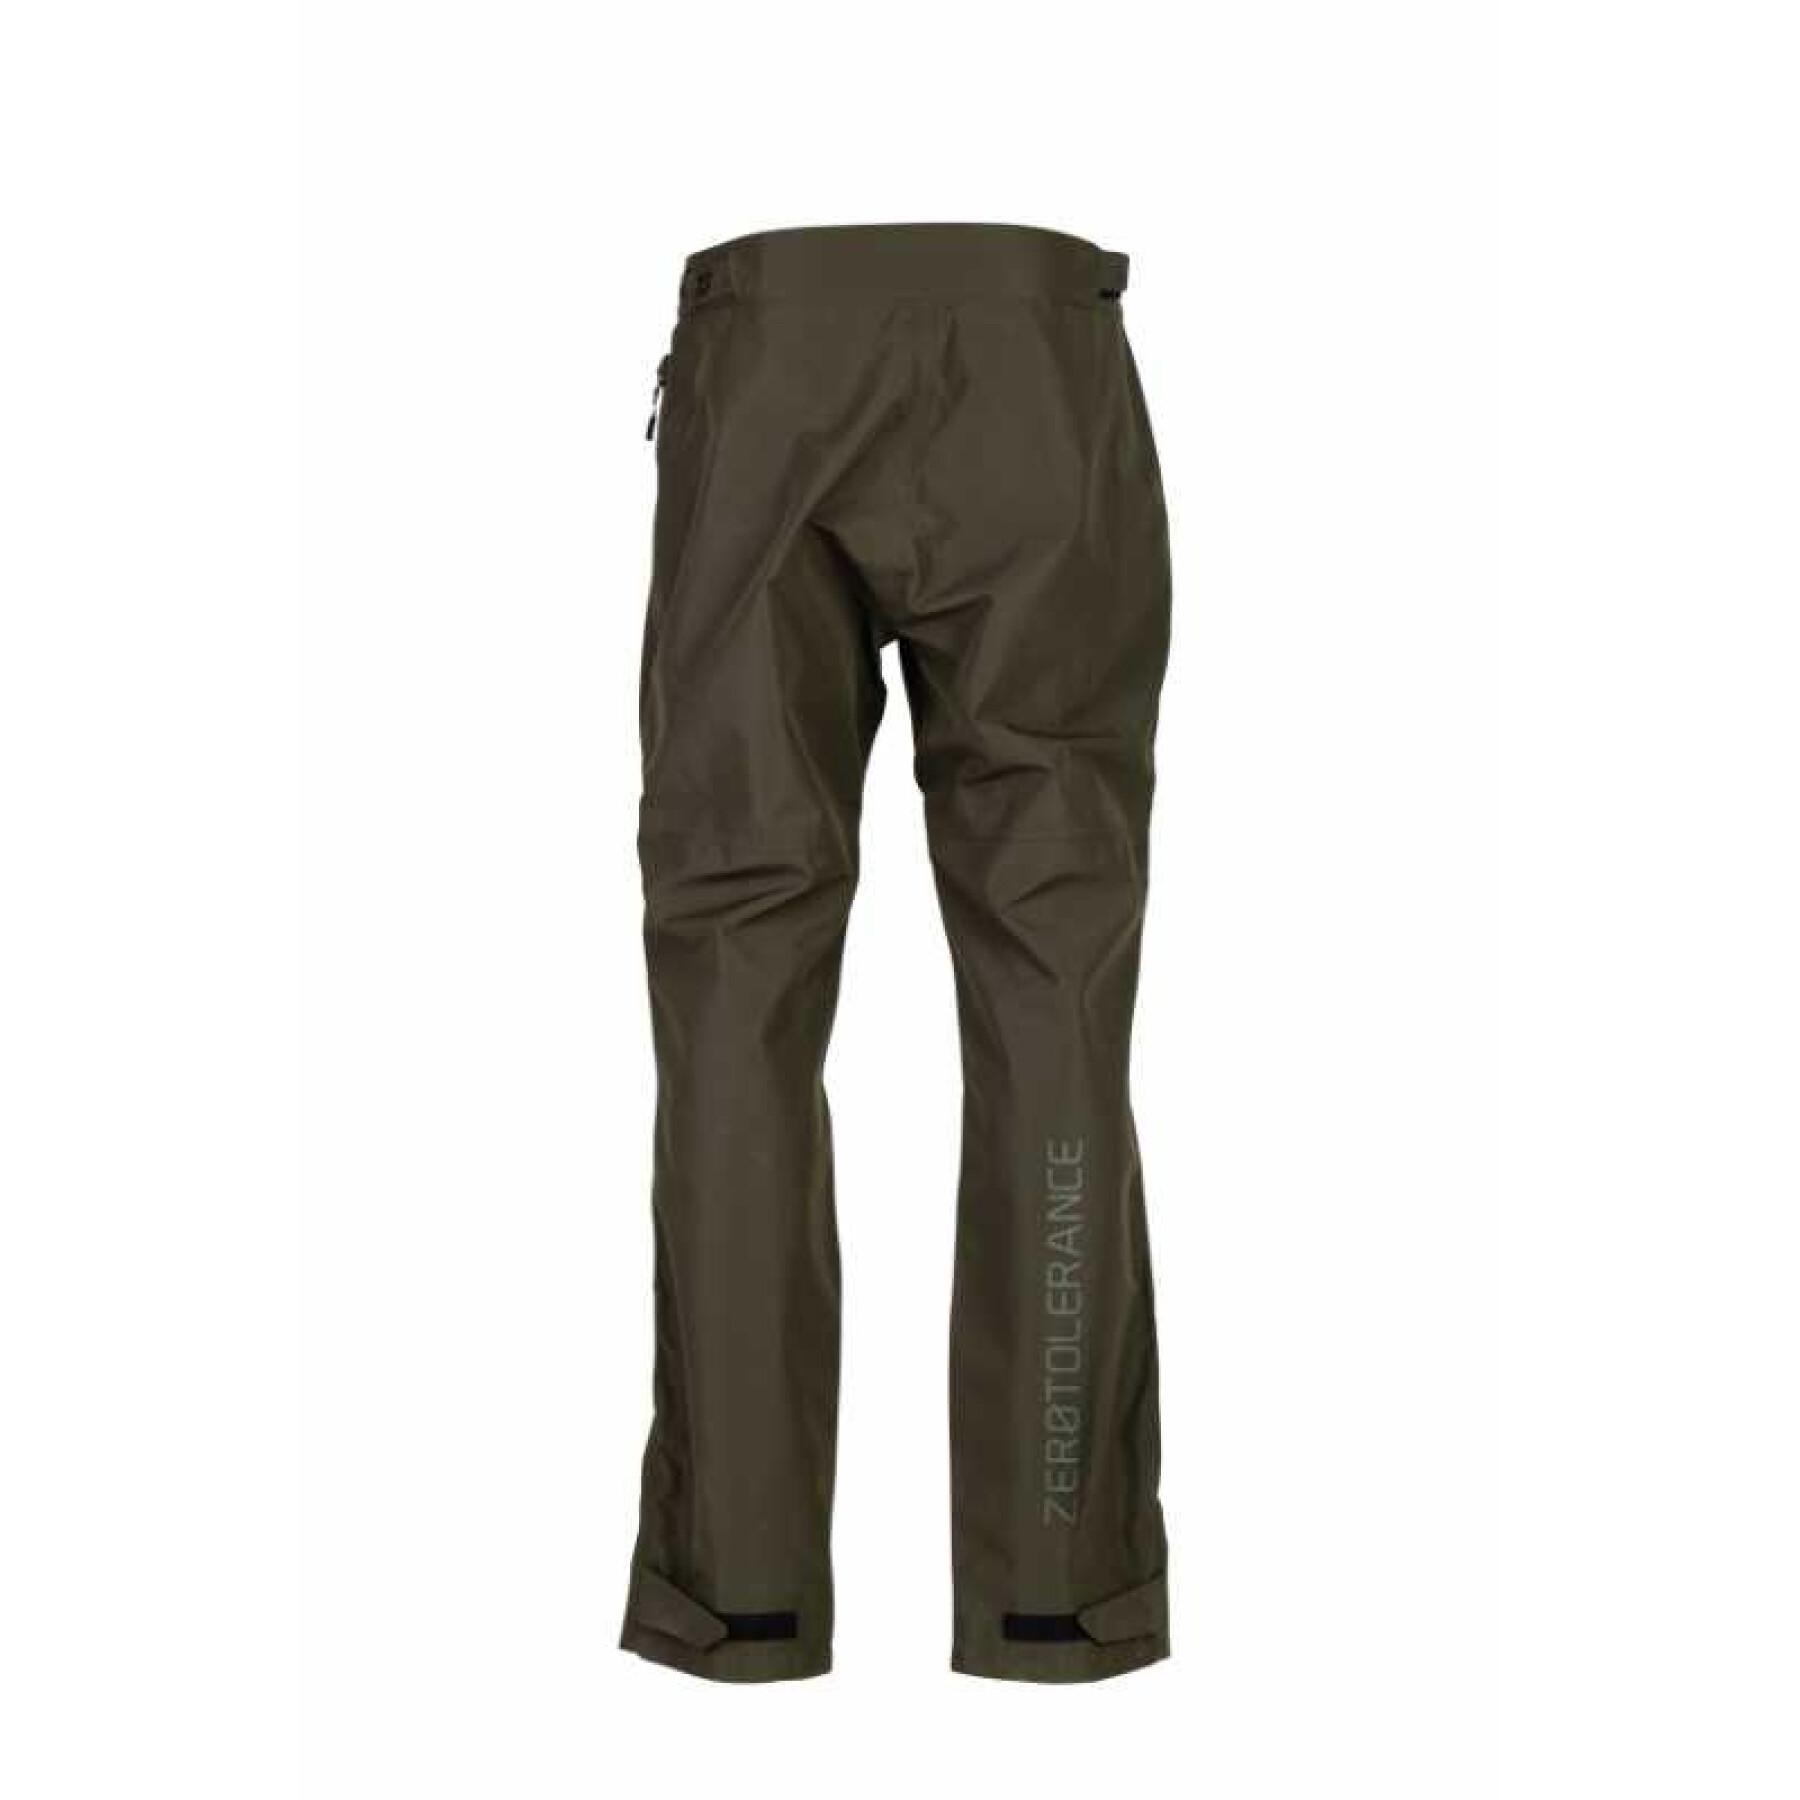 Waterproof trousers ZT extreme